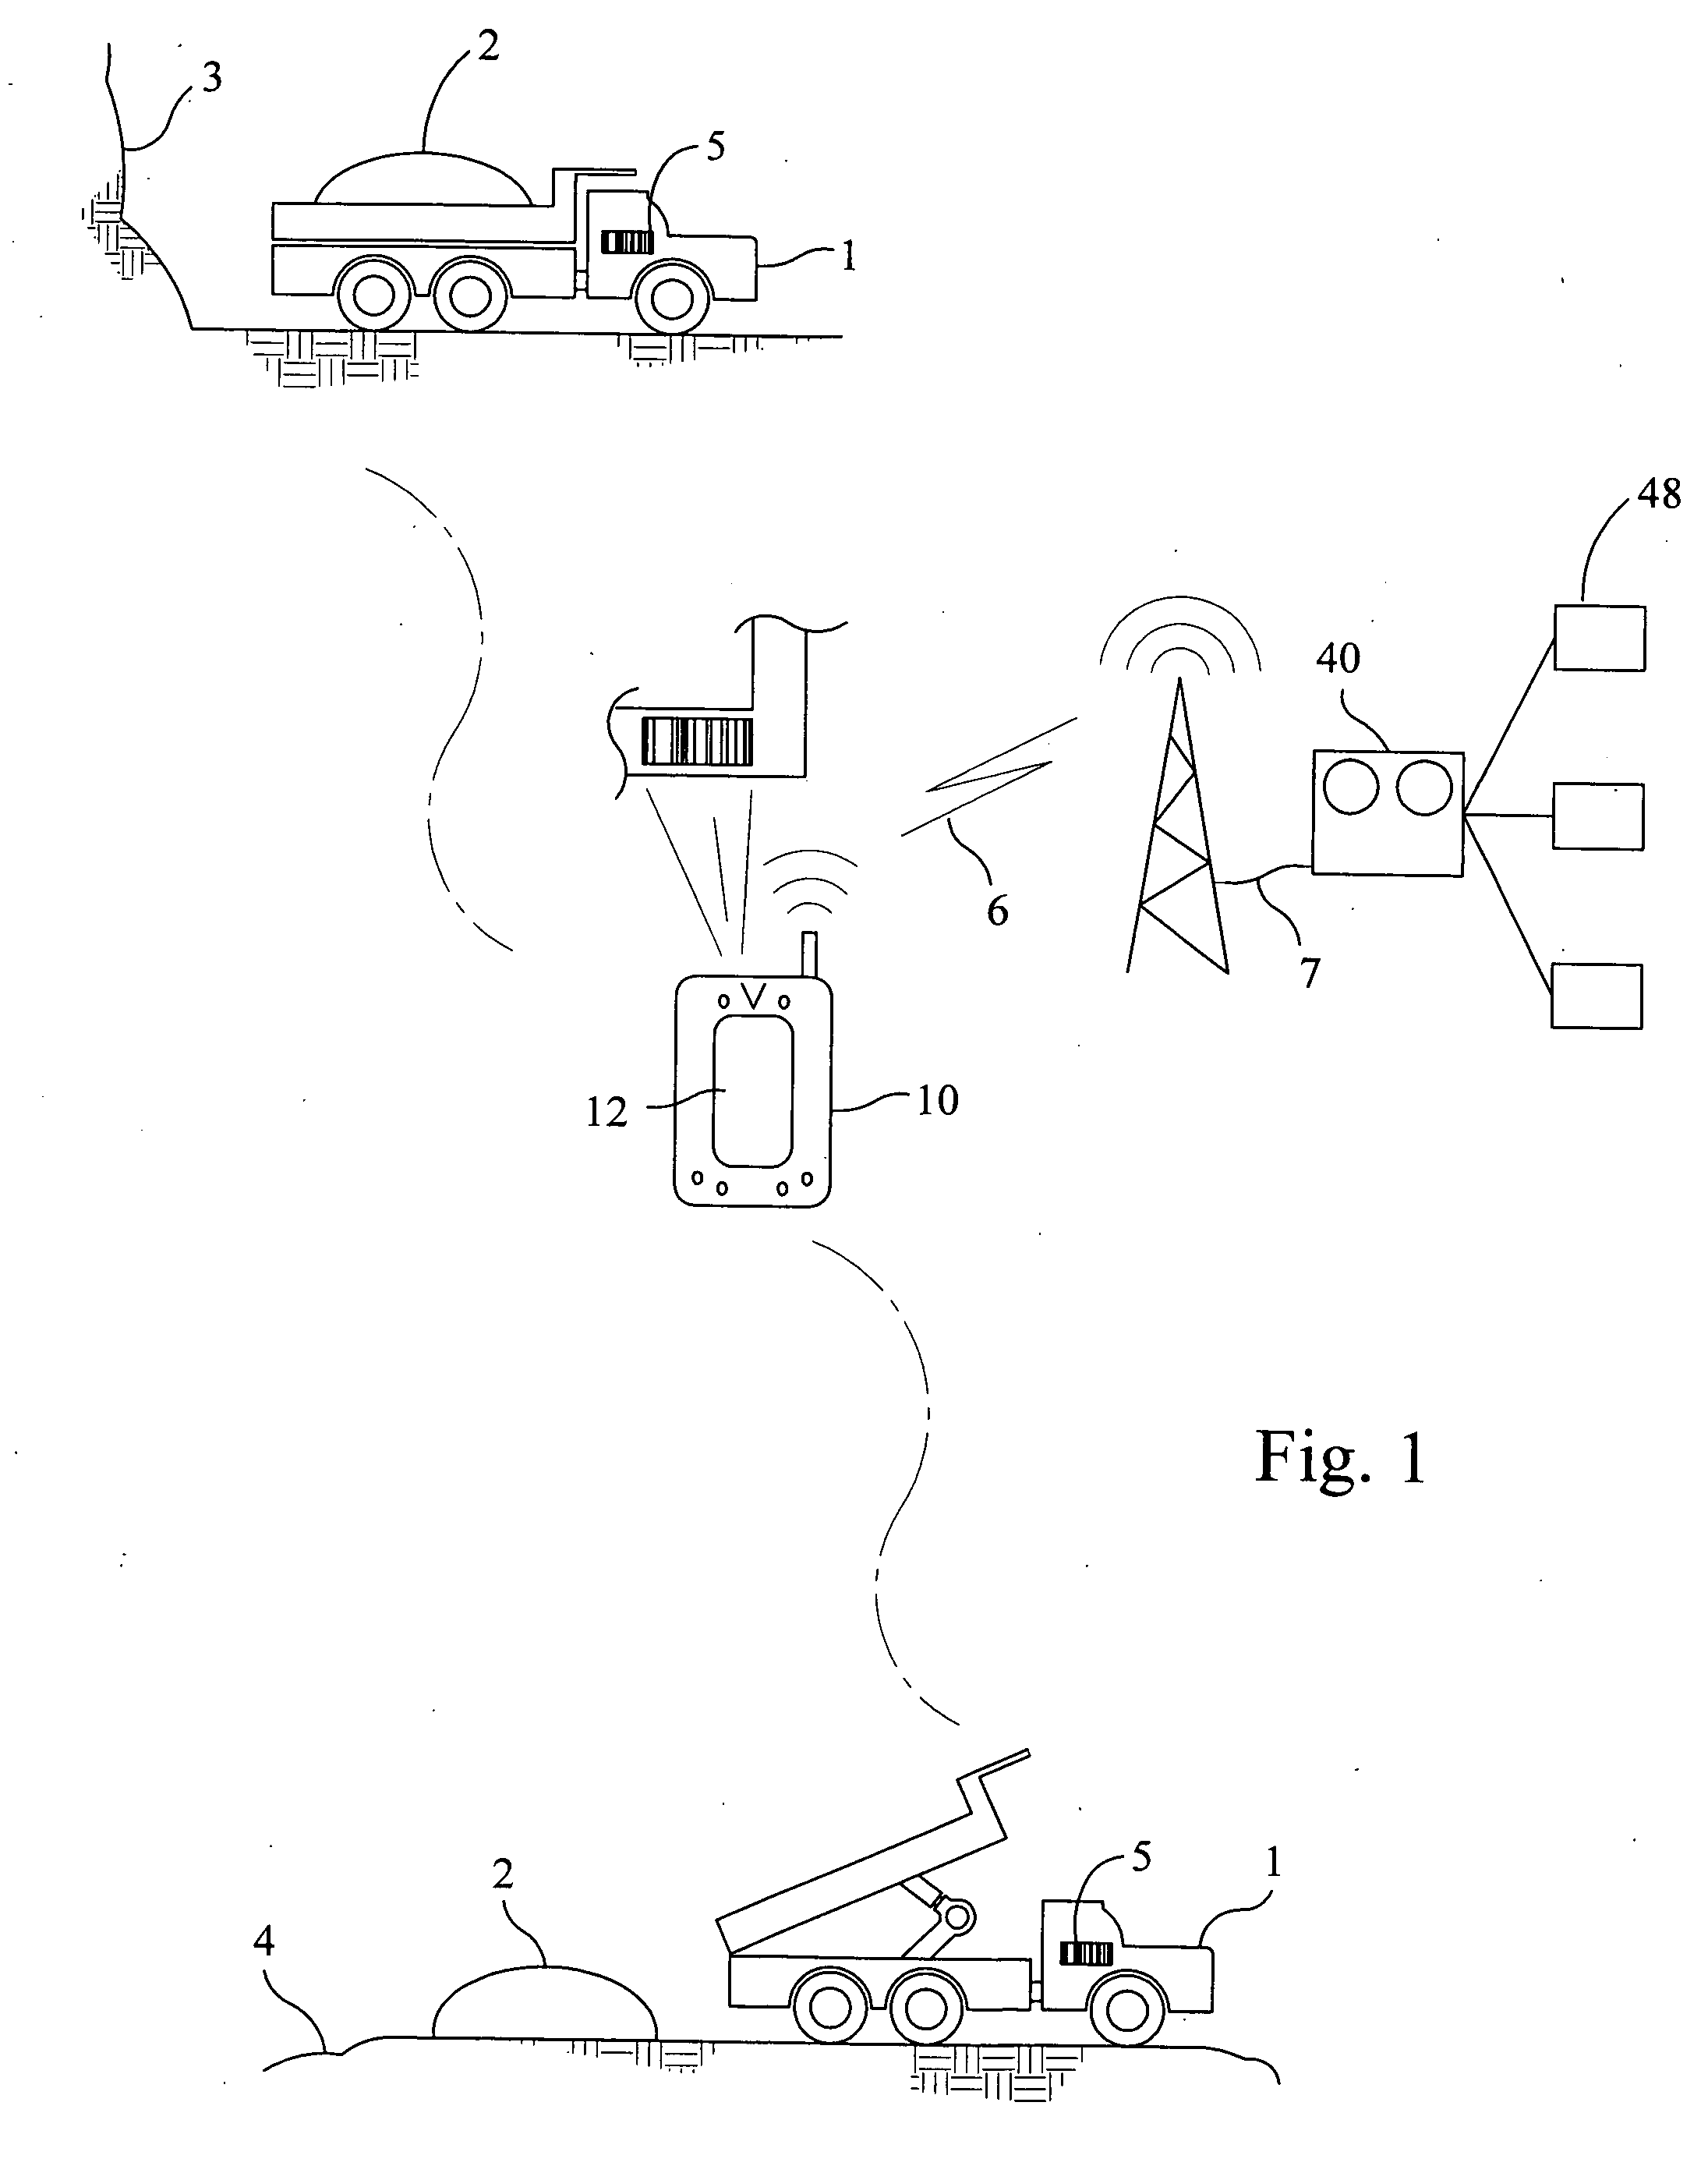 Material hauling and delivery monitoring system